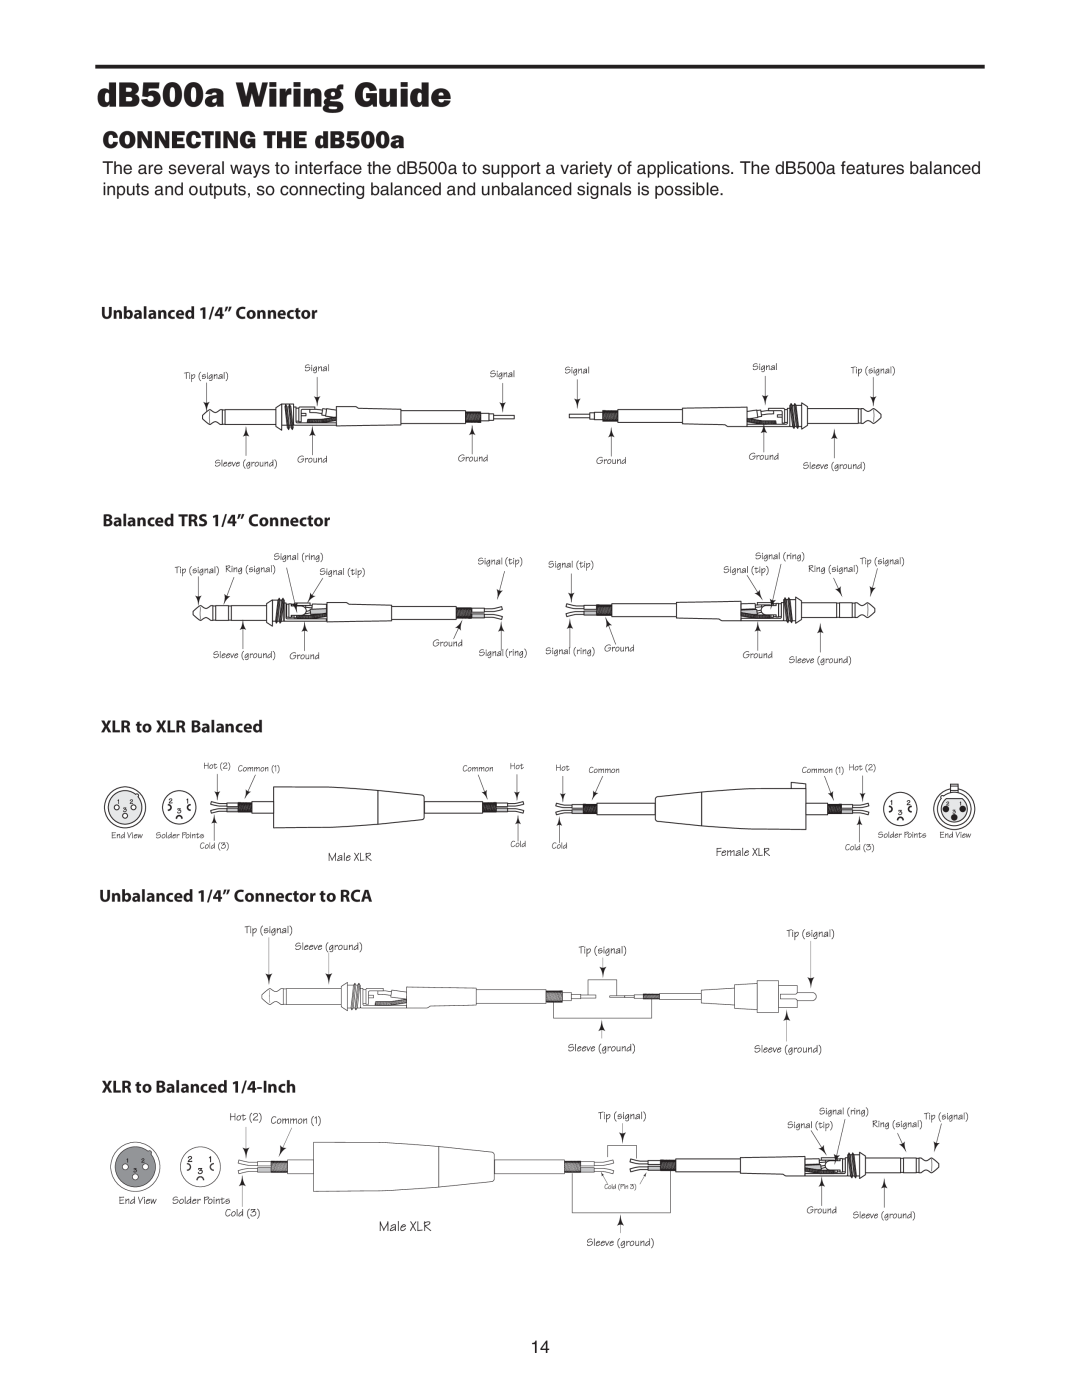 Samson manual dB500a Wiring Guide, CONNECTING THE dB500a 